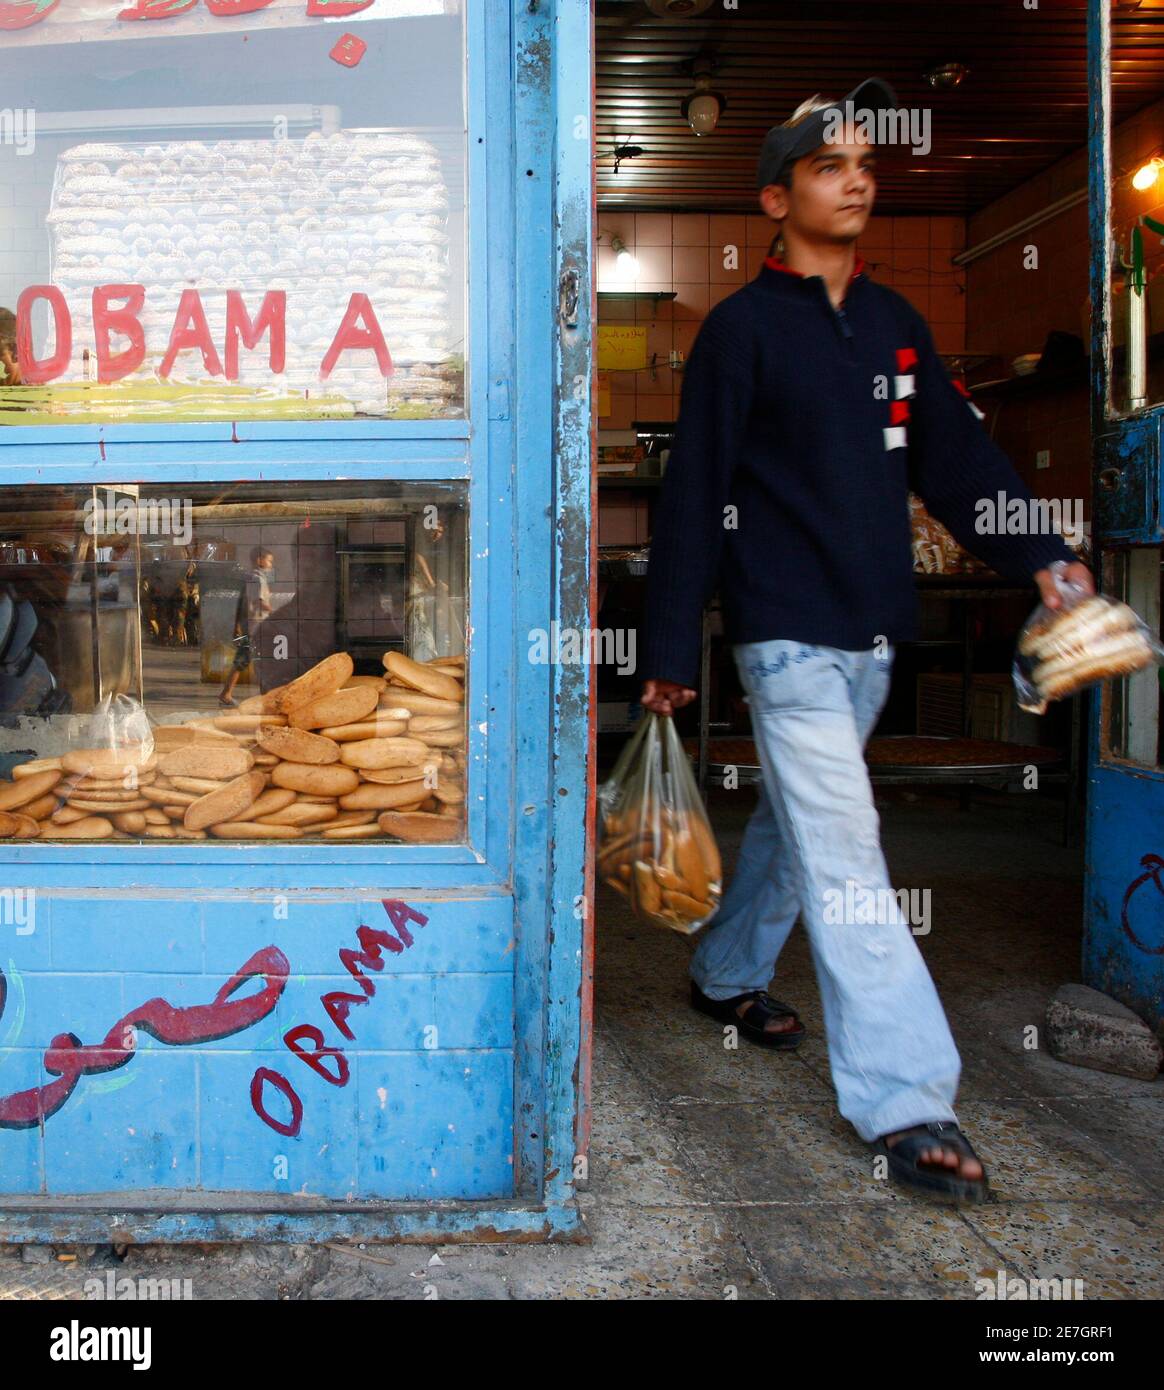 A resident leaves a bakery renamed after U.S. President-elect Barack Obama, in Baghdad November 12, 2008. Hassan Ala'uddin, the bakery owner, said he repainted the sign for his bakery to 'Obama', hoping the president-elect will bring change to the U.S and Iraq.    REUTERS/Ceerwan Aziz  (IRAQ) Stock Photo